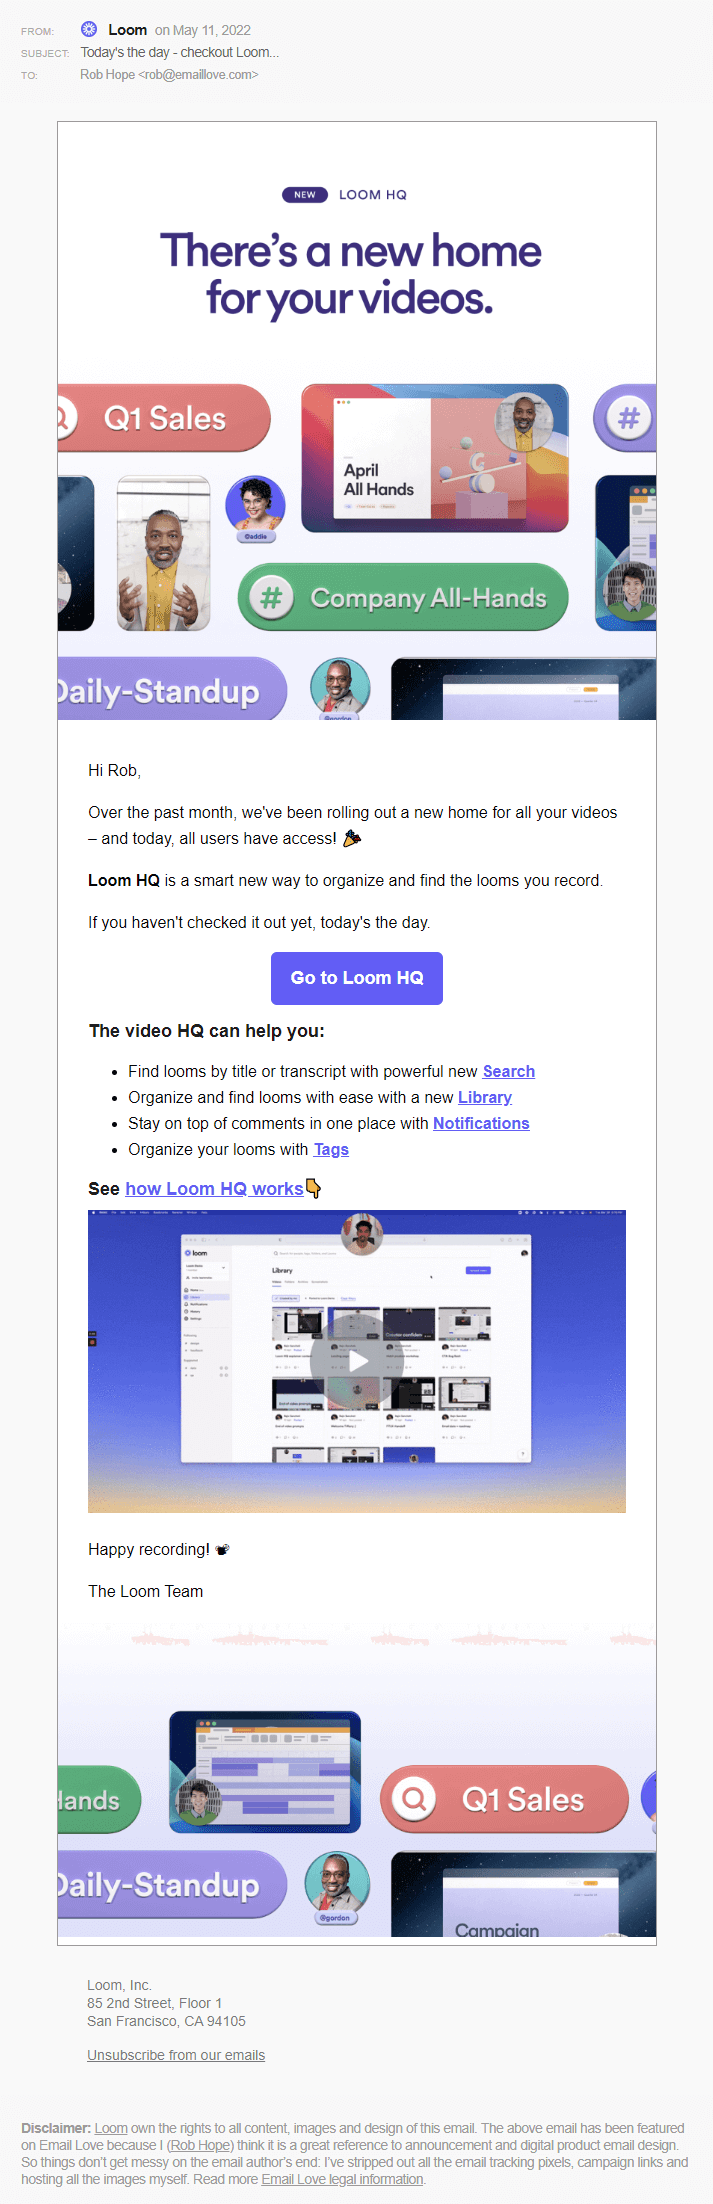 Loom’s New Feature email